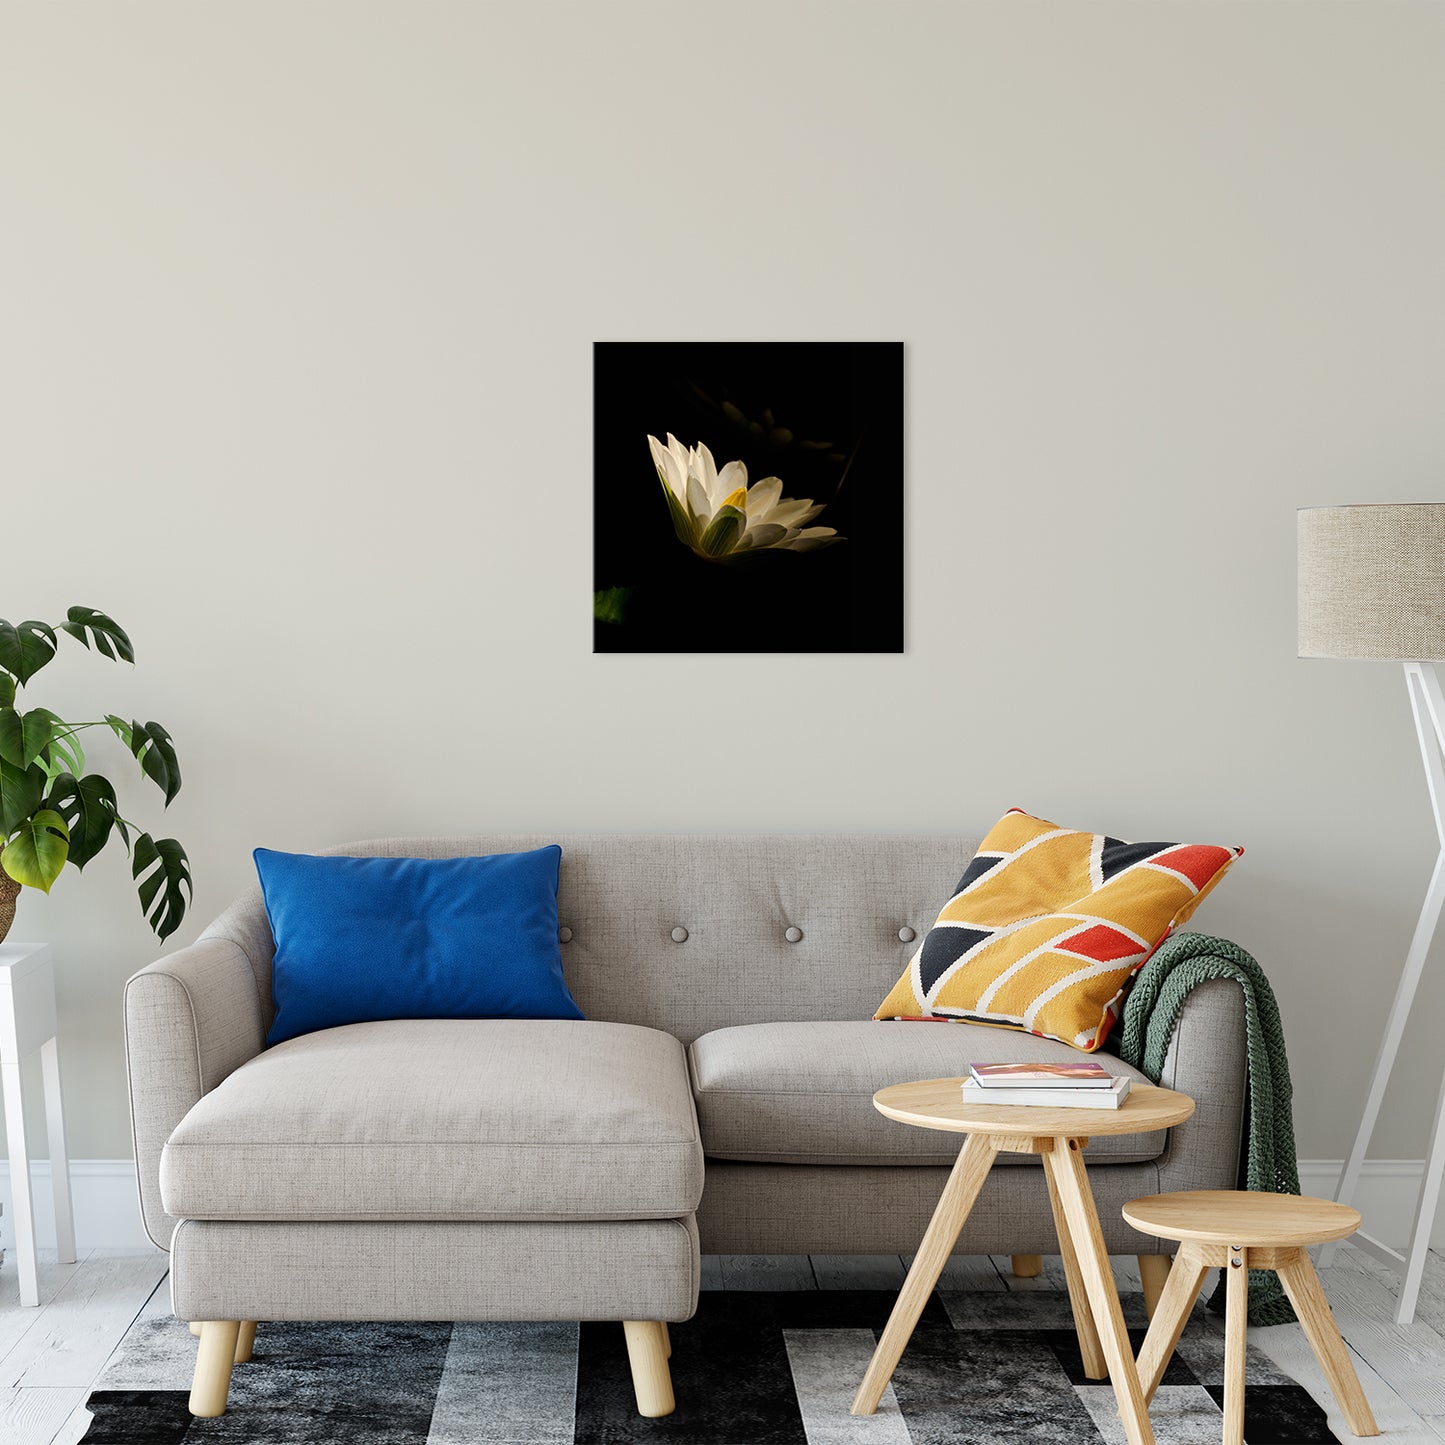 Spotlight on Waterlily - Square Nature / Floral Photo Fine Art & Unframed Wall Art Prints 20" x 20" / Fine Art Canvas - PIPAFINEART